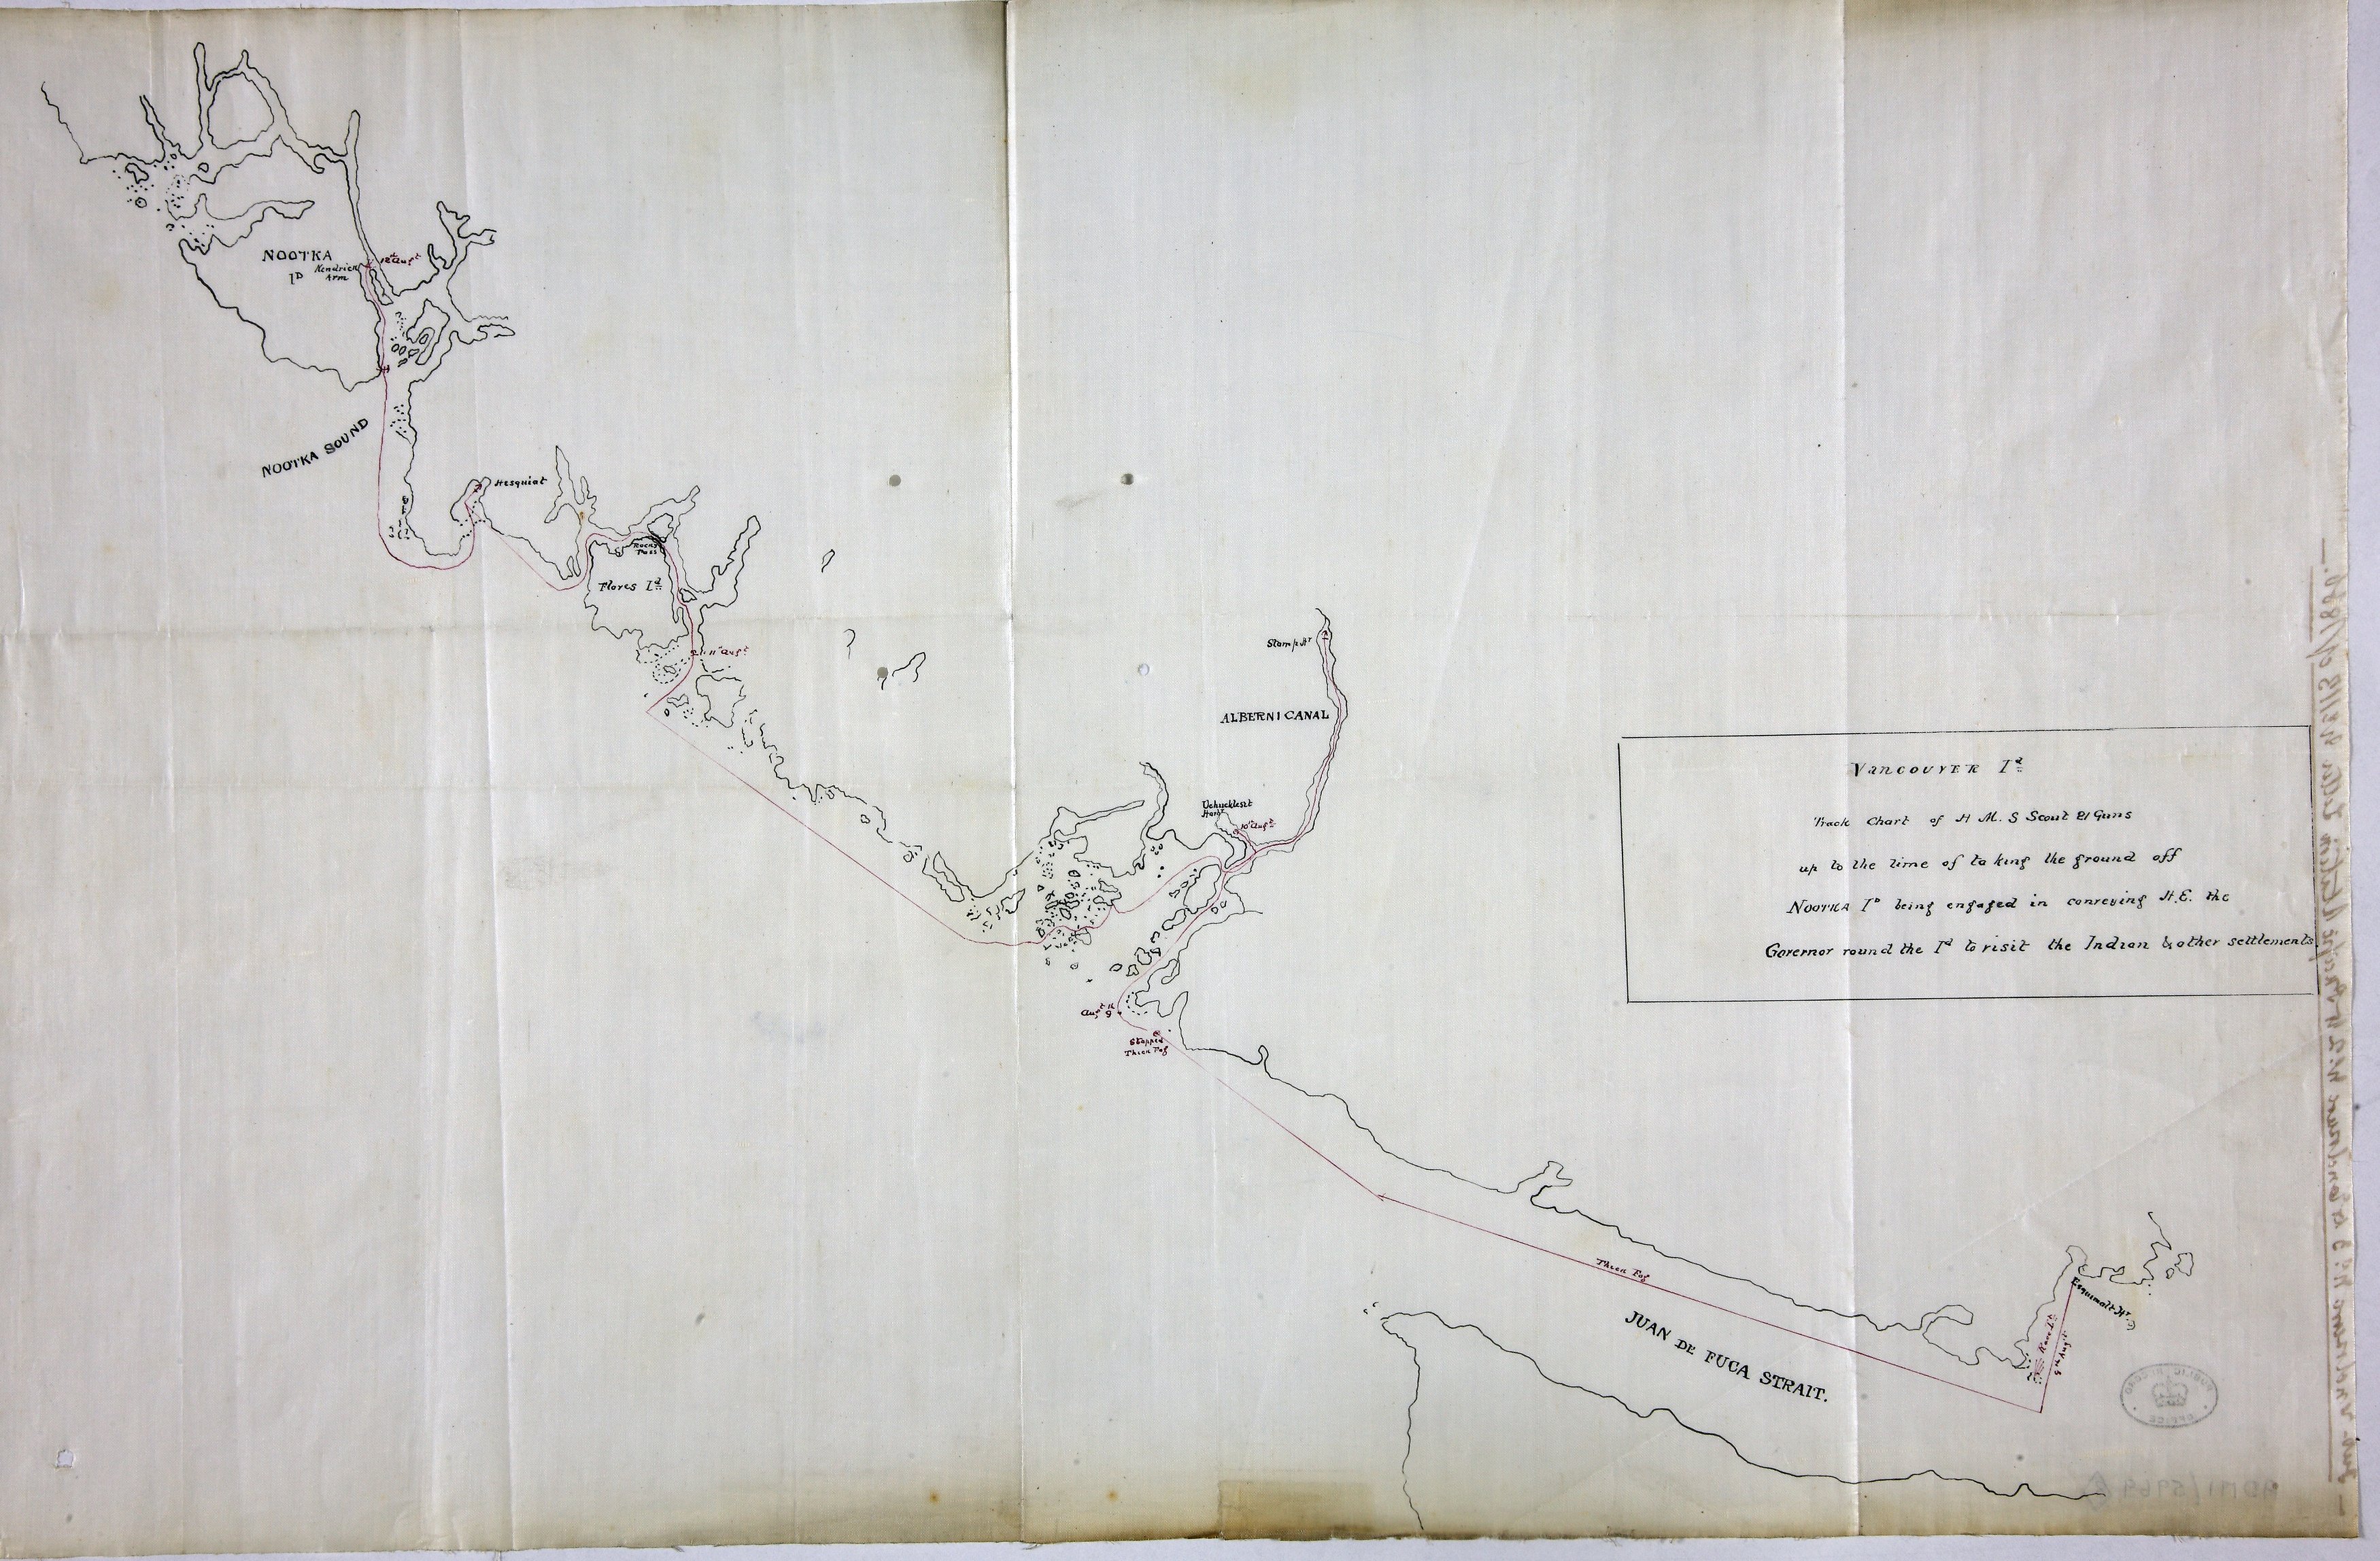 Vancouver Island: Chart of HMS Scout 9-12 August 1866 showing her grounding off Nootka Island while 'conveying H.E. the Governor round the Id. to visit the Indian & other settlements'.